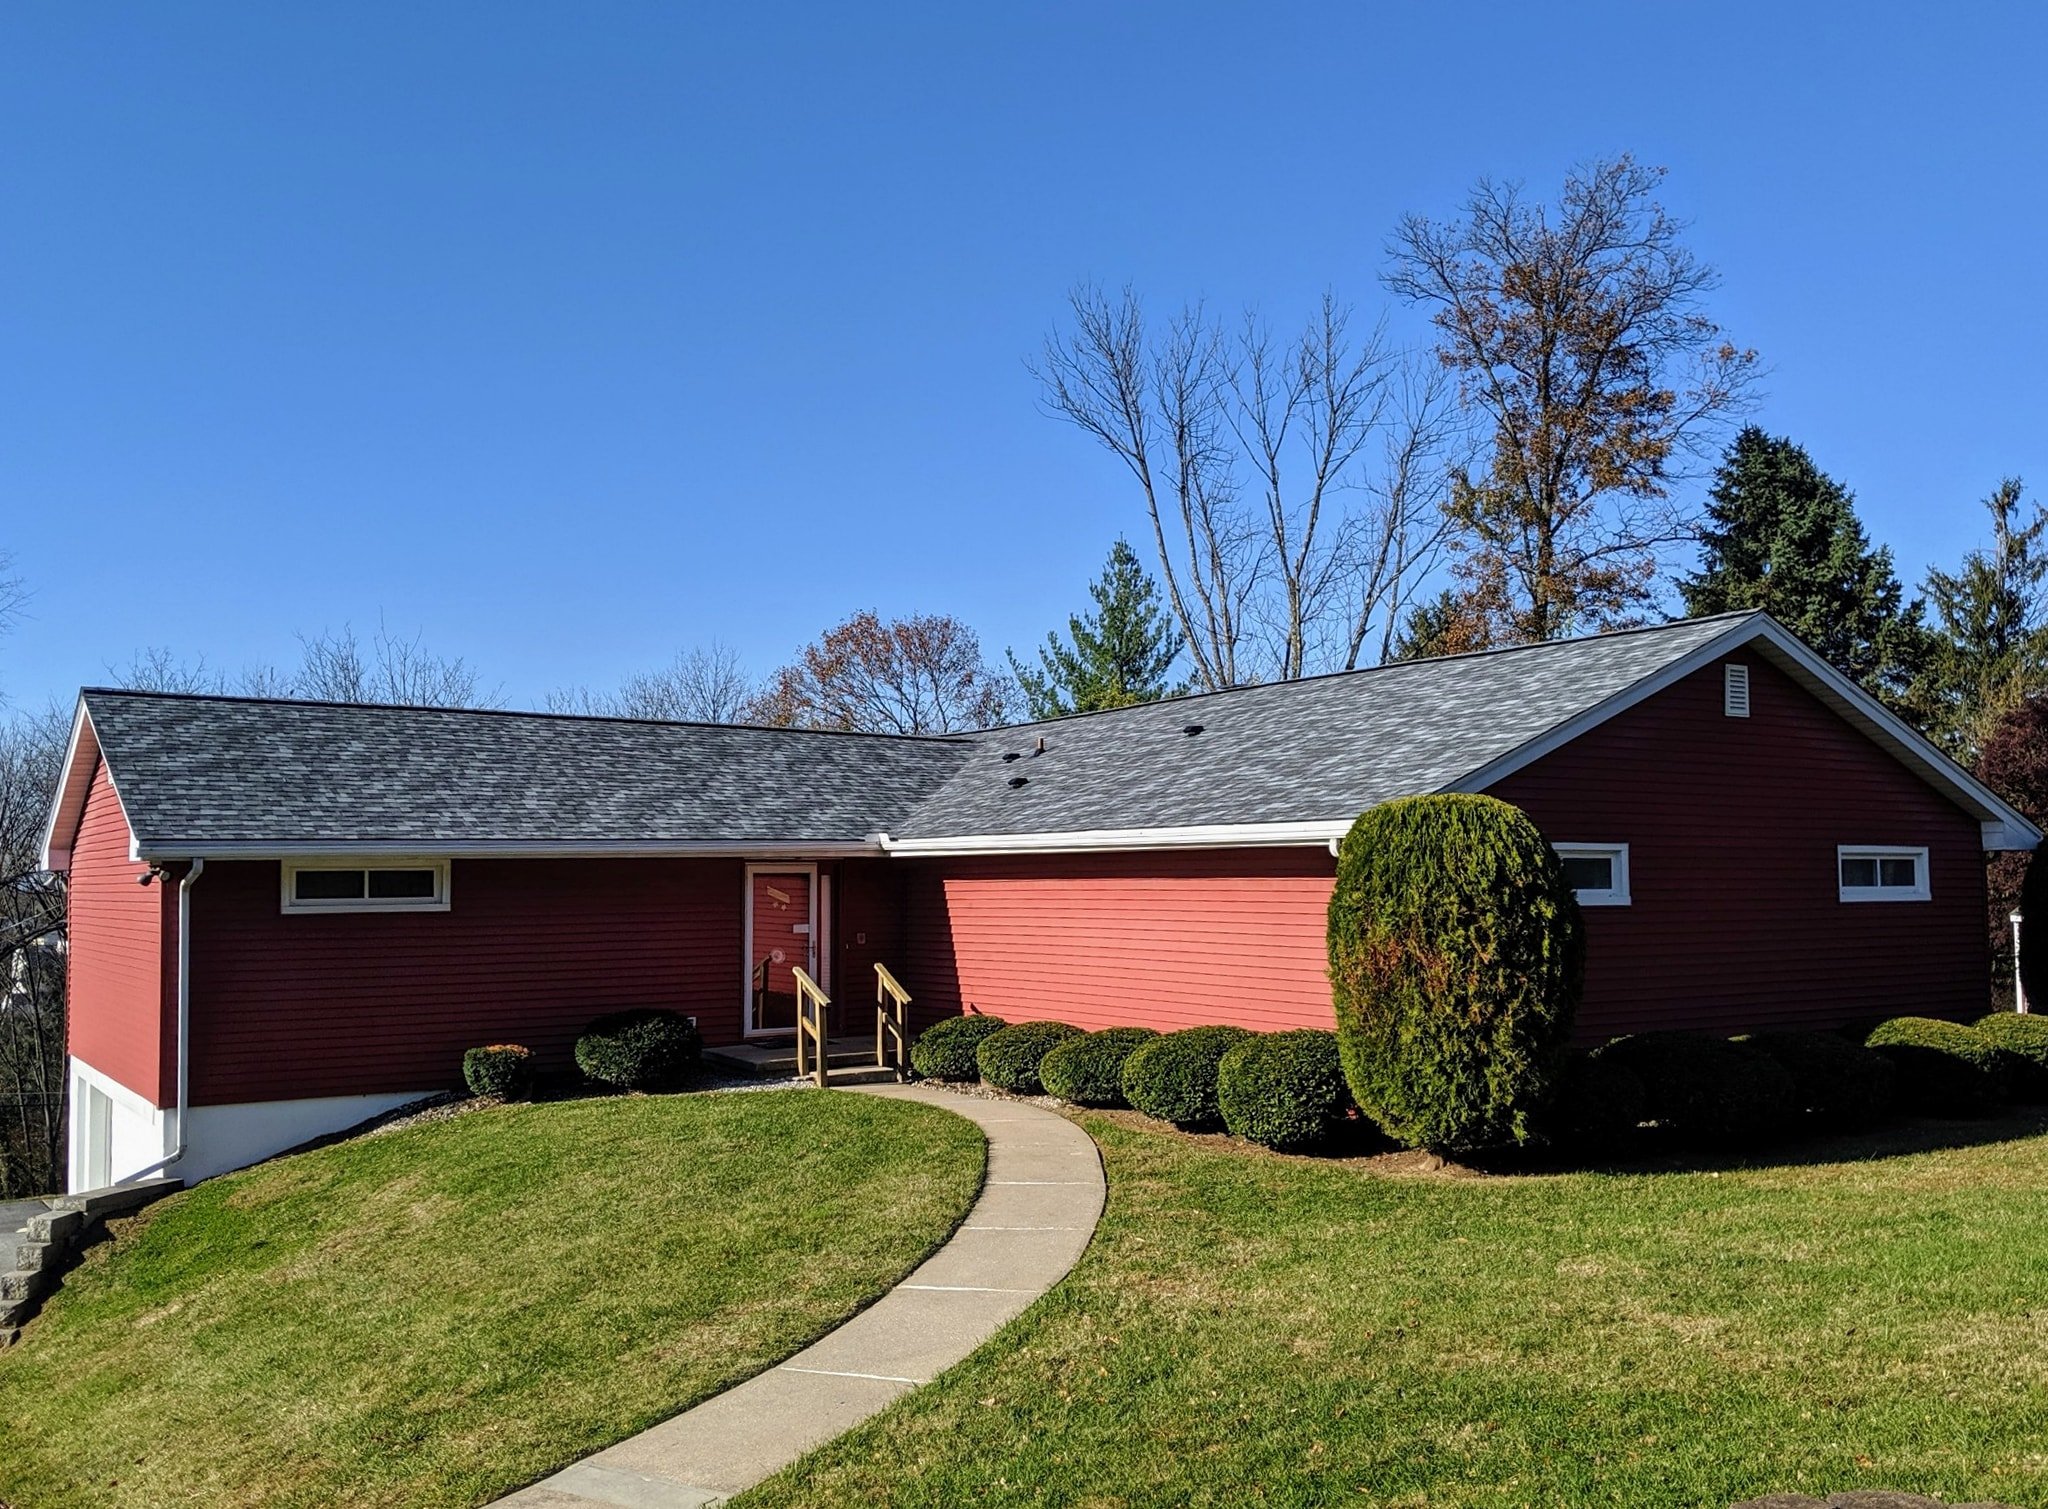 Westminster-MD-Roof-Replacement-Owens-Corning-Slatestone-Gray.jpg